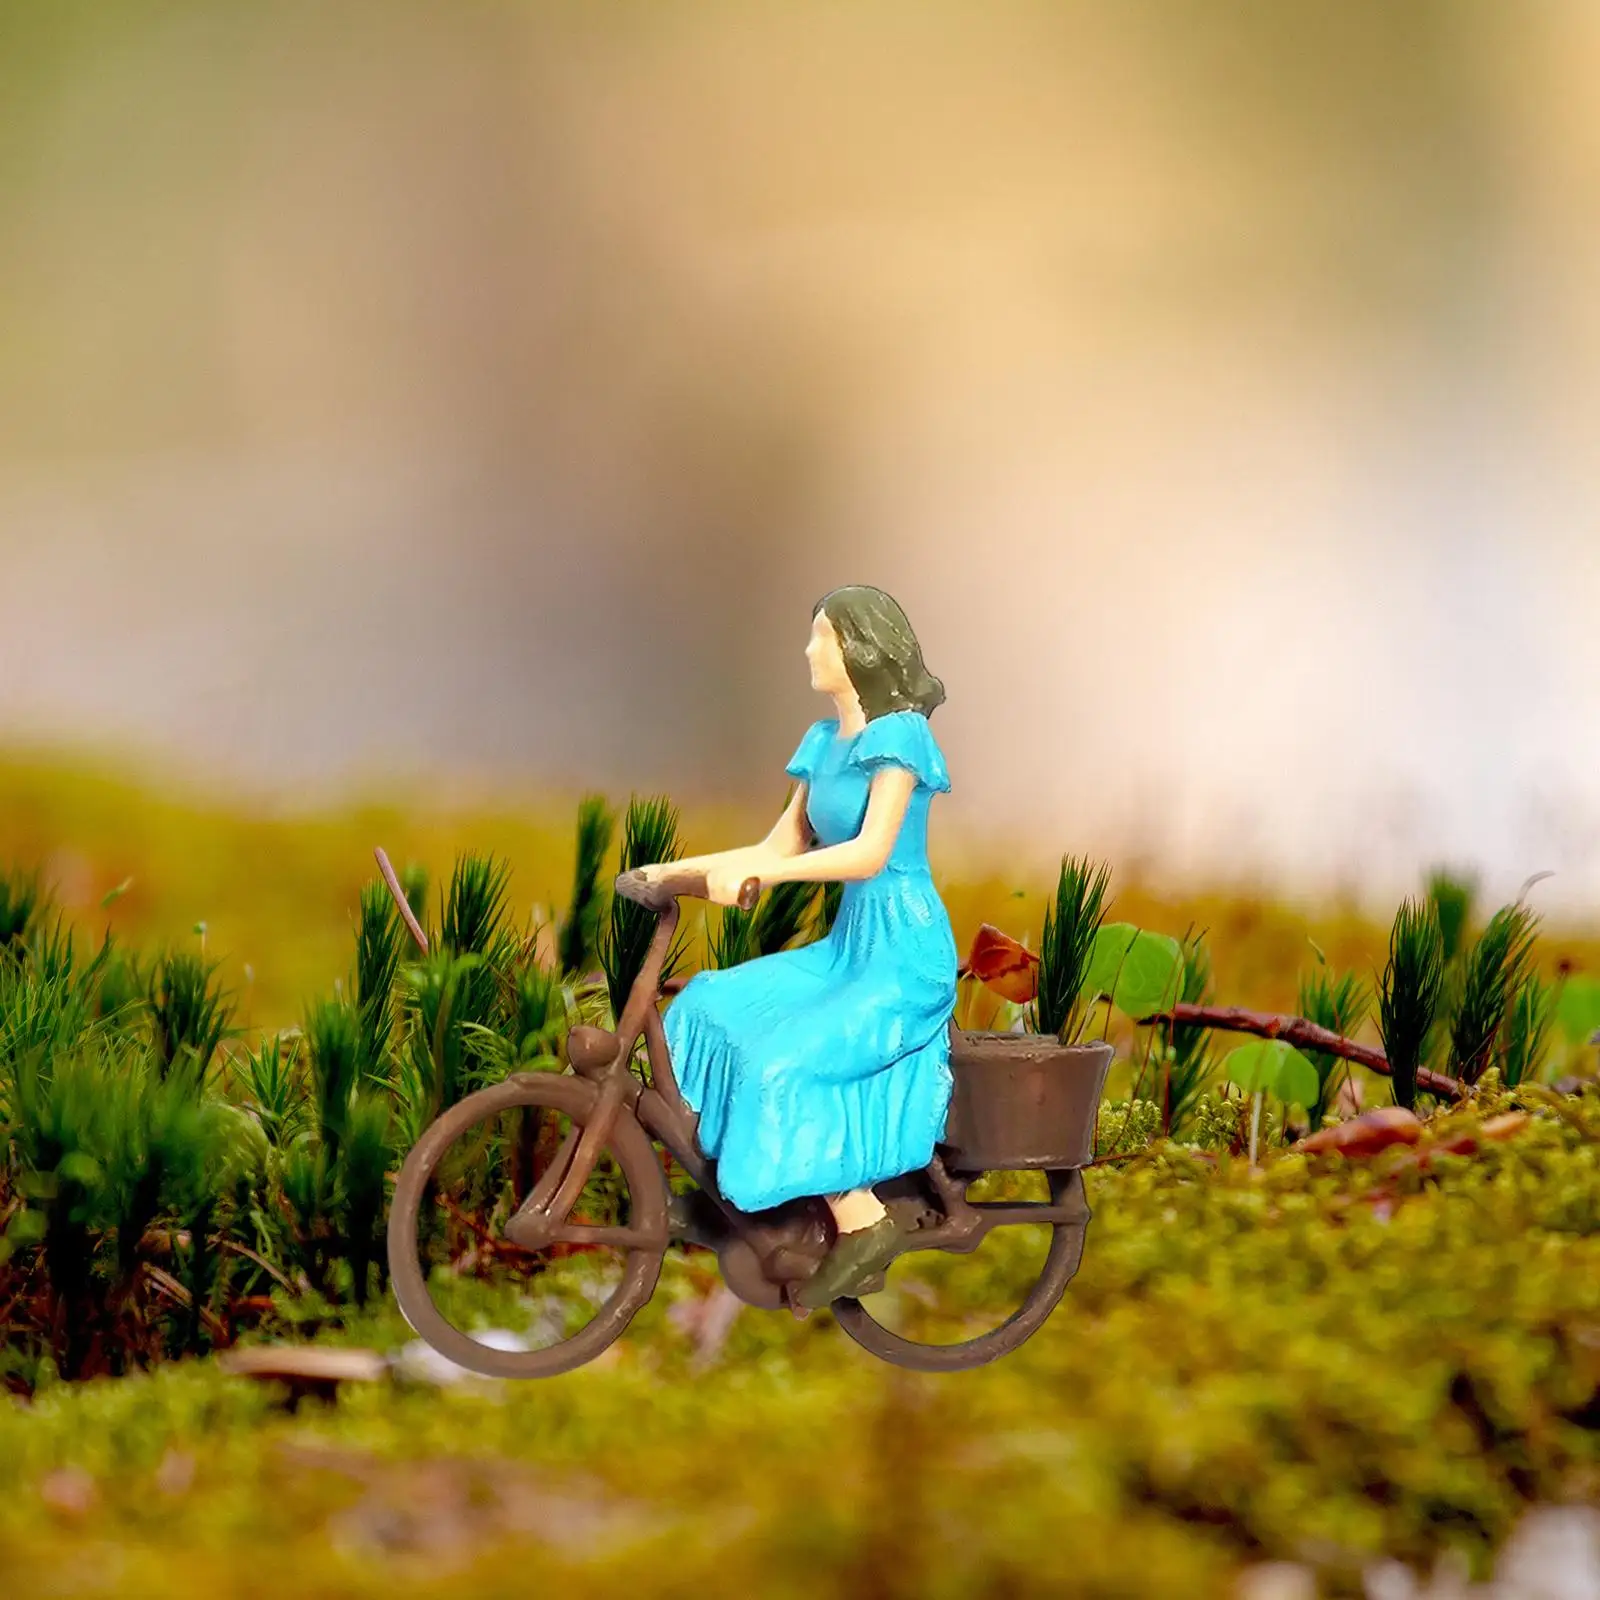 Resin 1/87 Scale Cyclist Figurine Tiny People Simulation People Figurines for Cycling Scene Layout